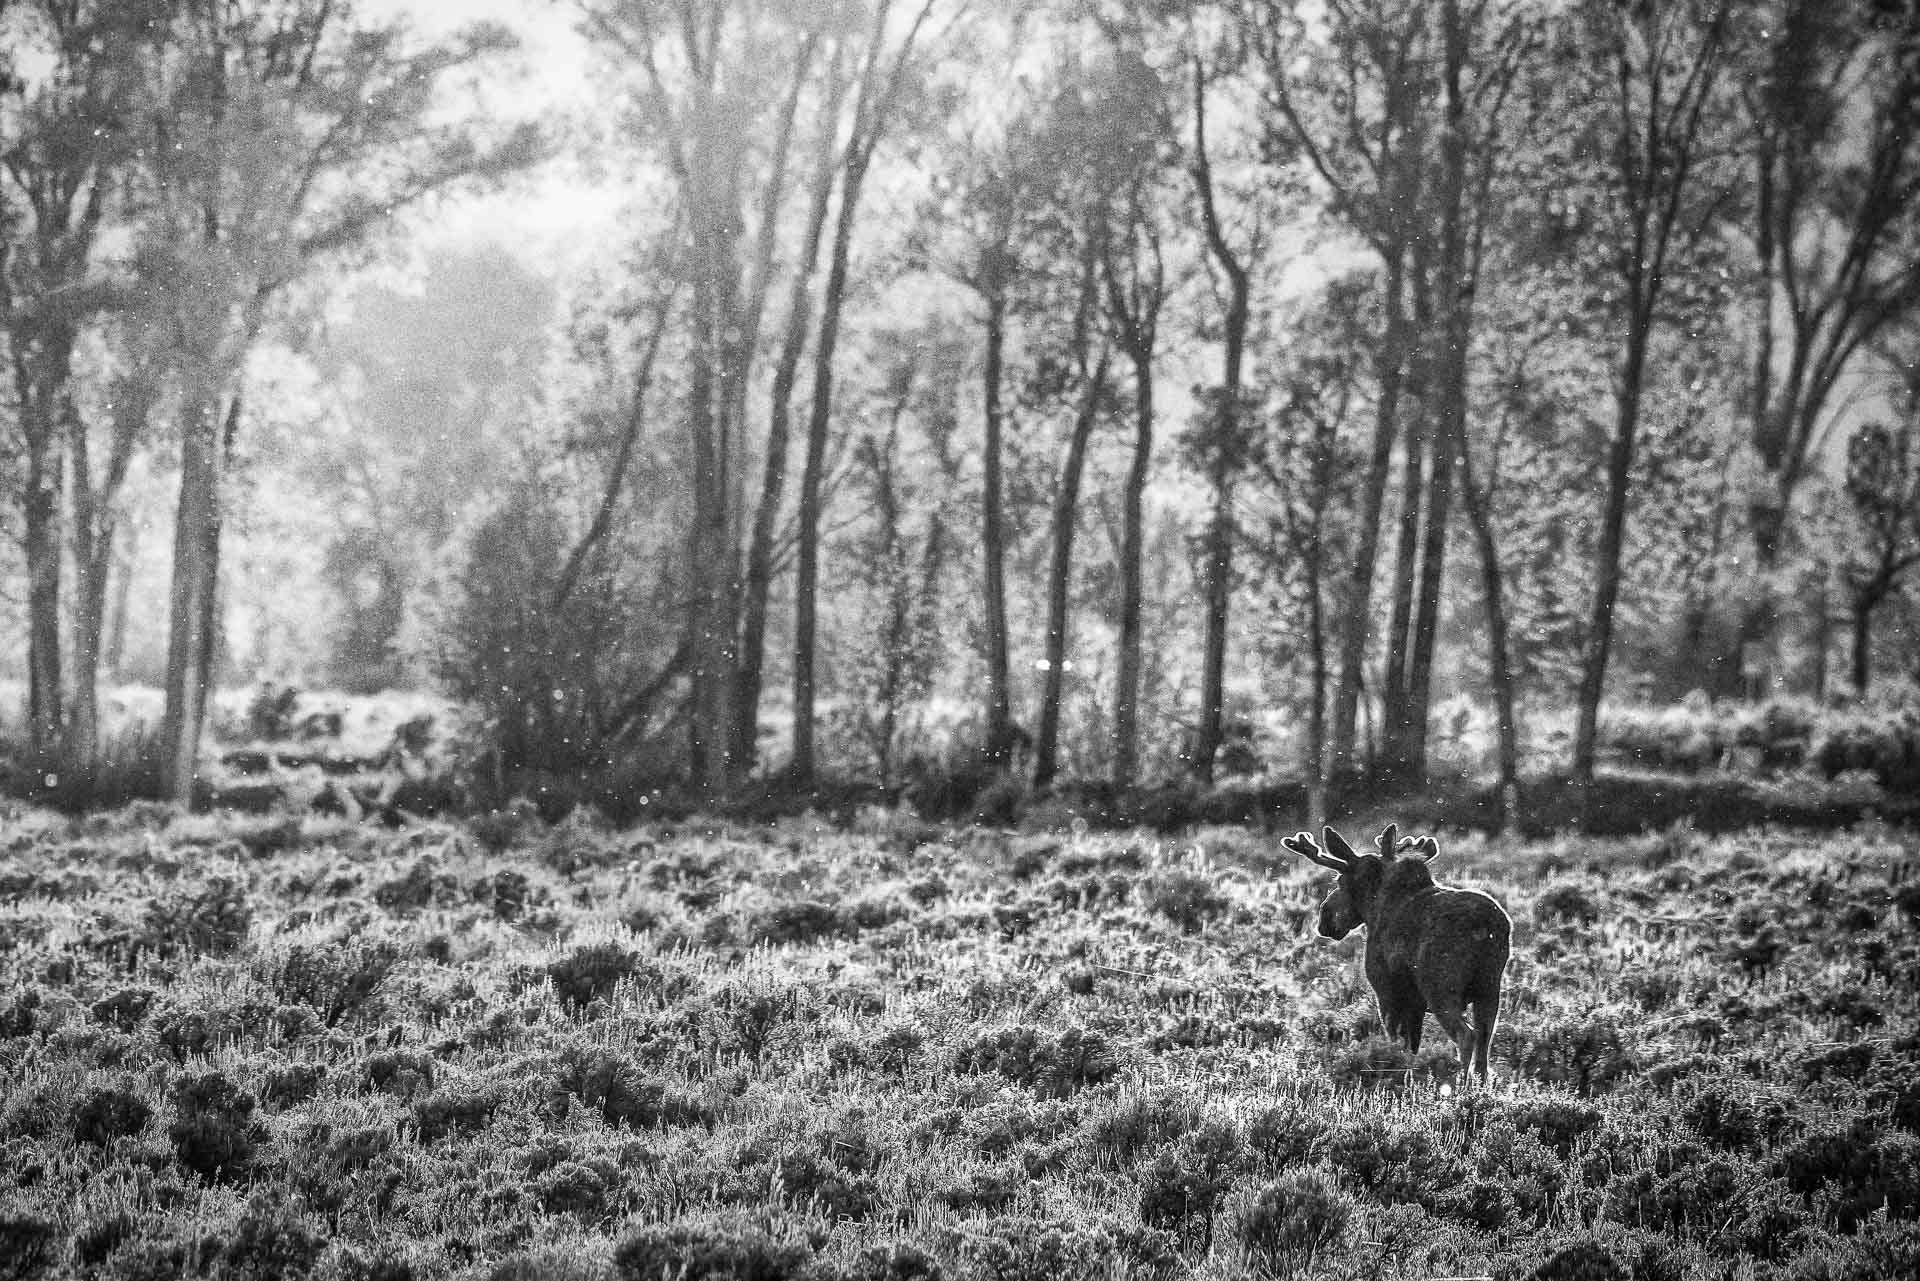 Black And White Photograph Of A Bull Moose Walking Into Forest With Etherial Lighting, By Dwight Vasel And Available At Gallery Wild